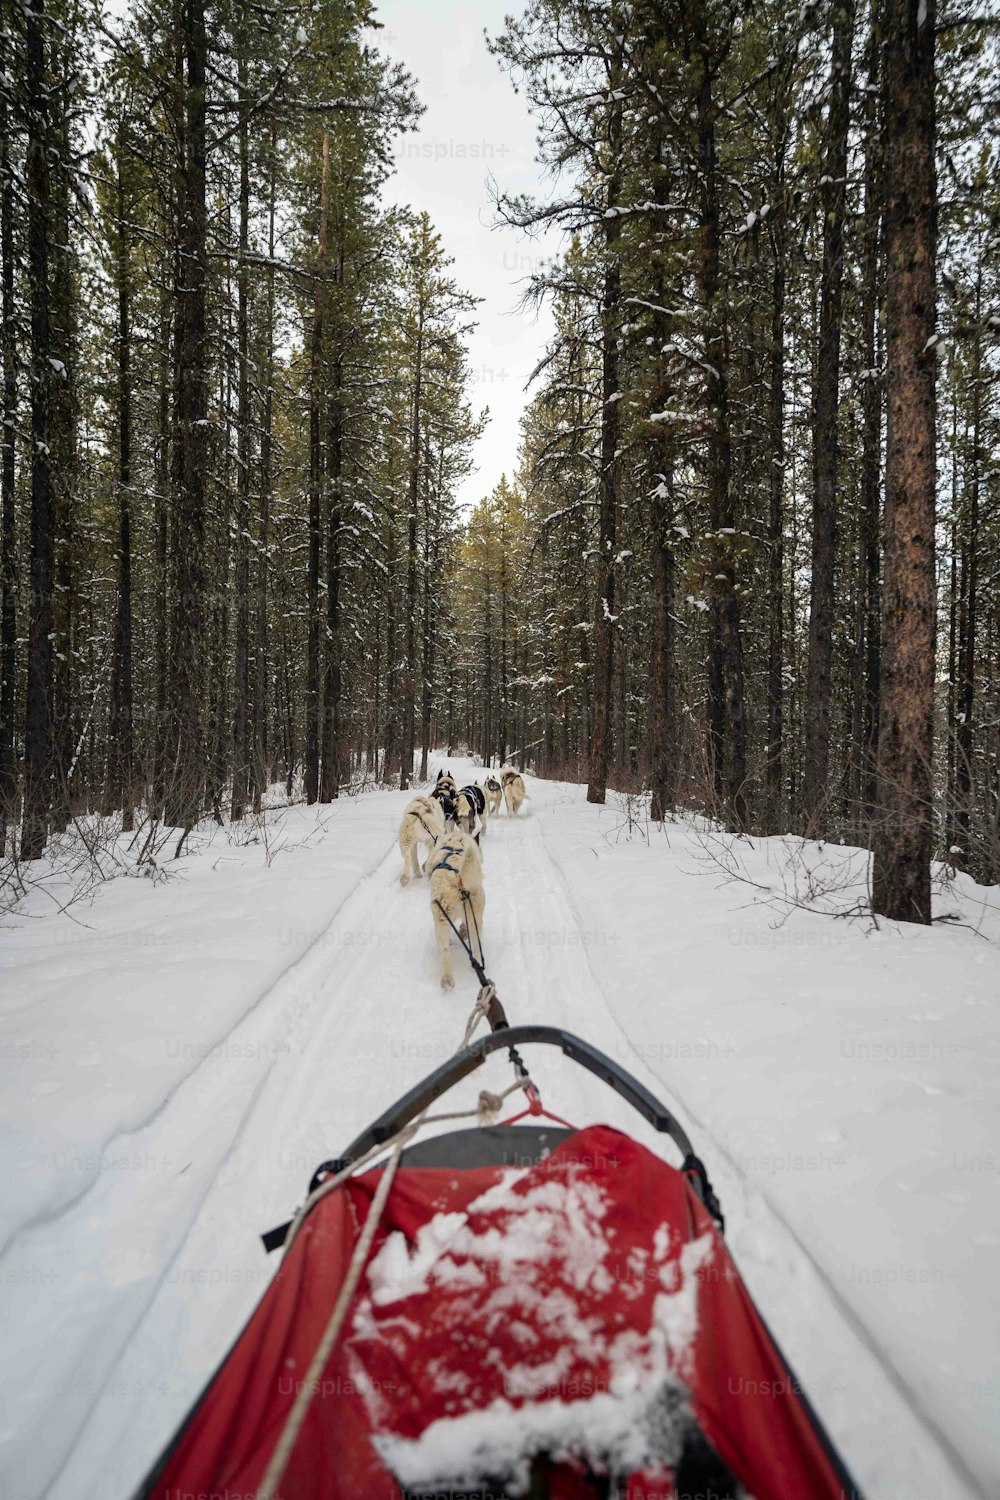 a dog pulling a sled behind it on a snowy road